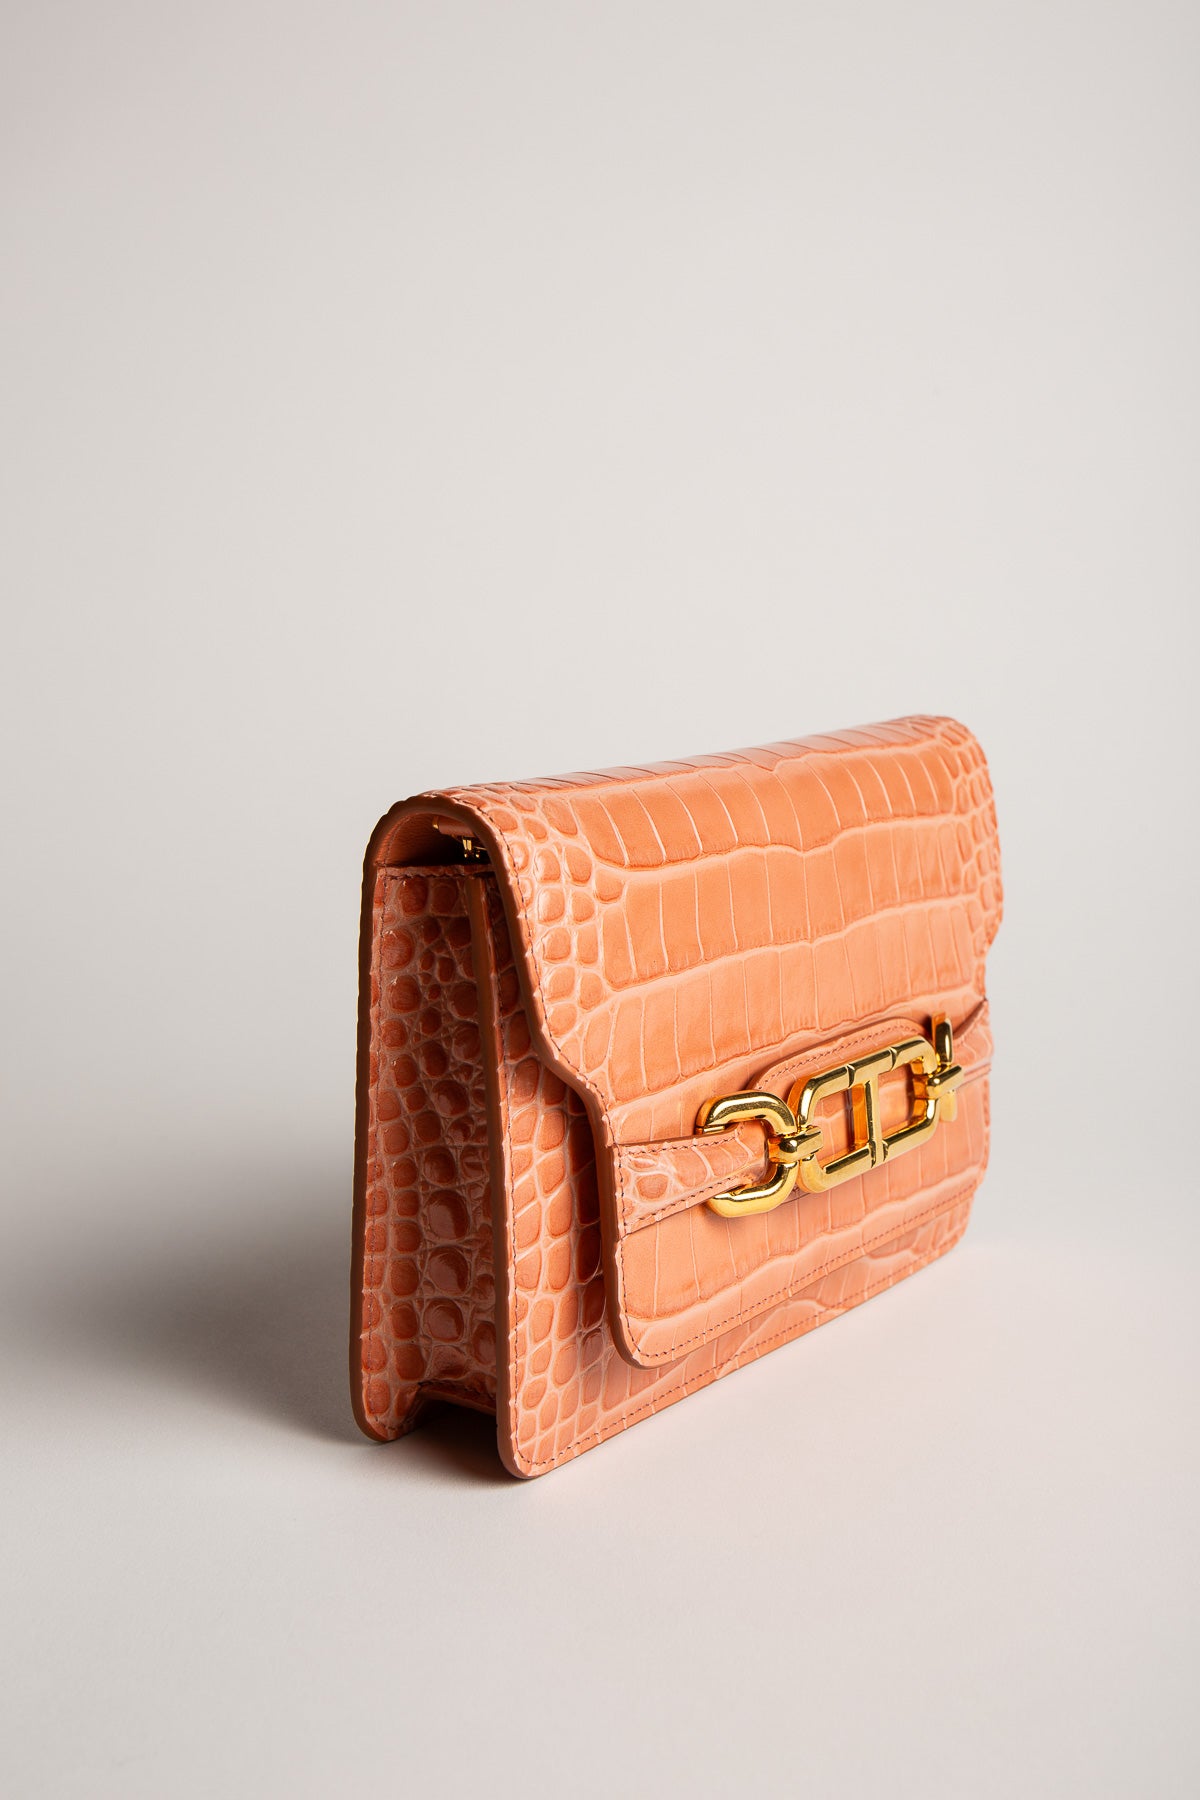 TOM FORD | STAMPED CROCODILE LEATHER WHITNEY SMALL SHOULDER BAG